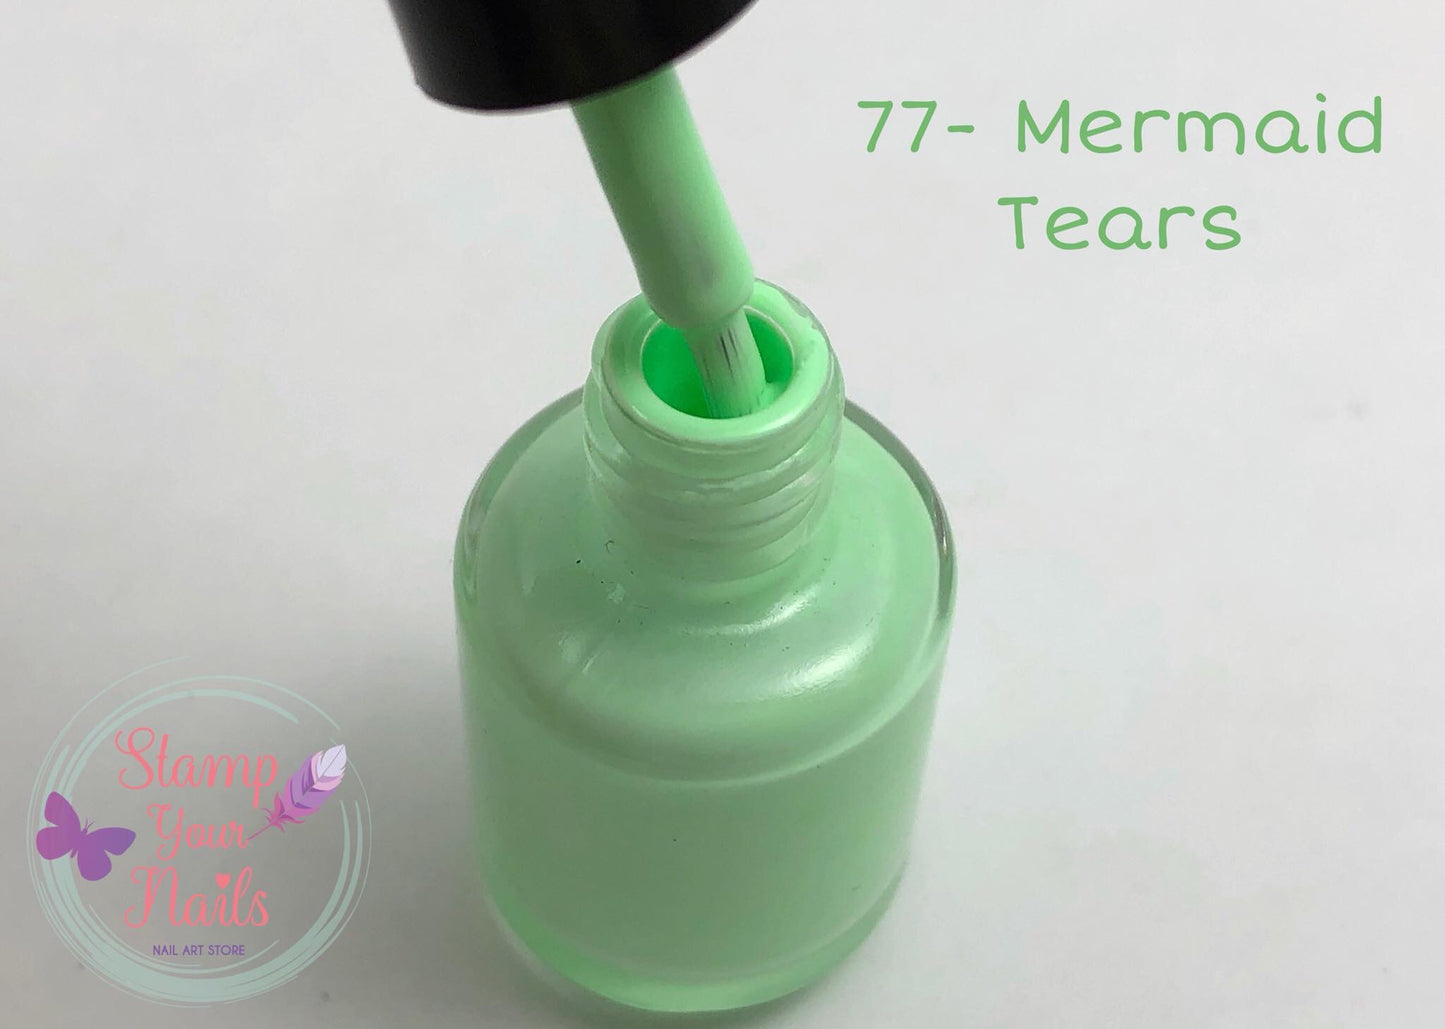 77 Mermaid Tears - Stamp your nails